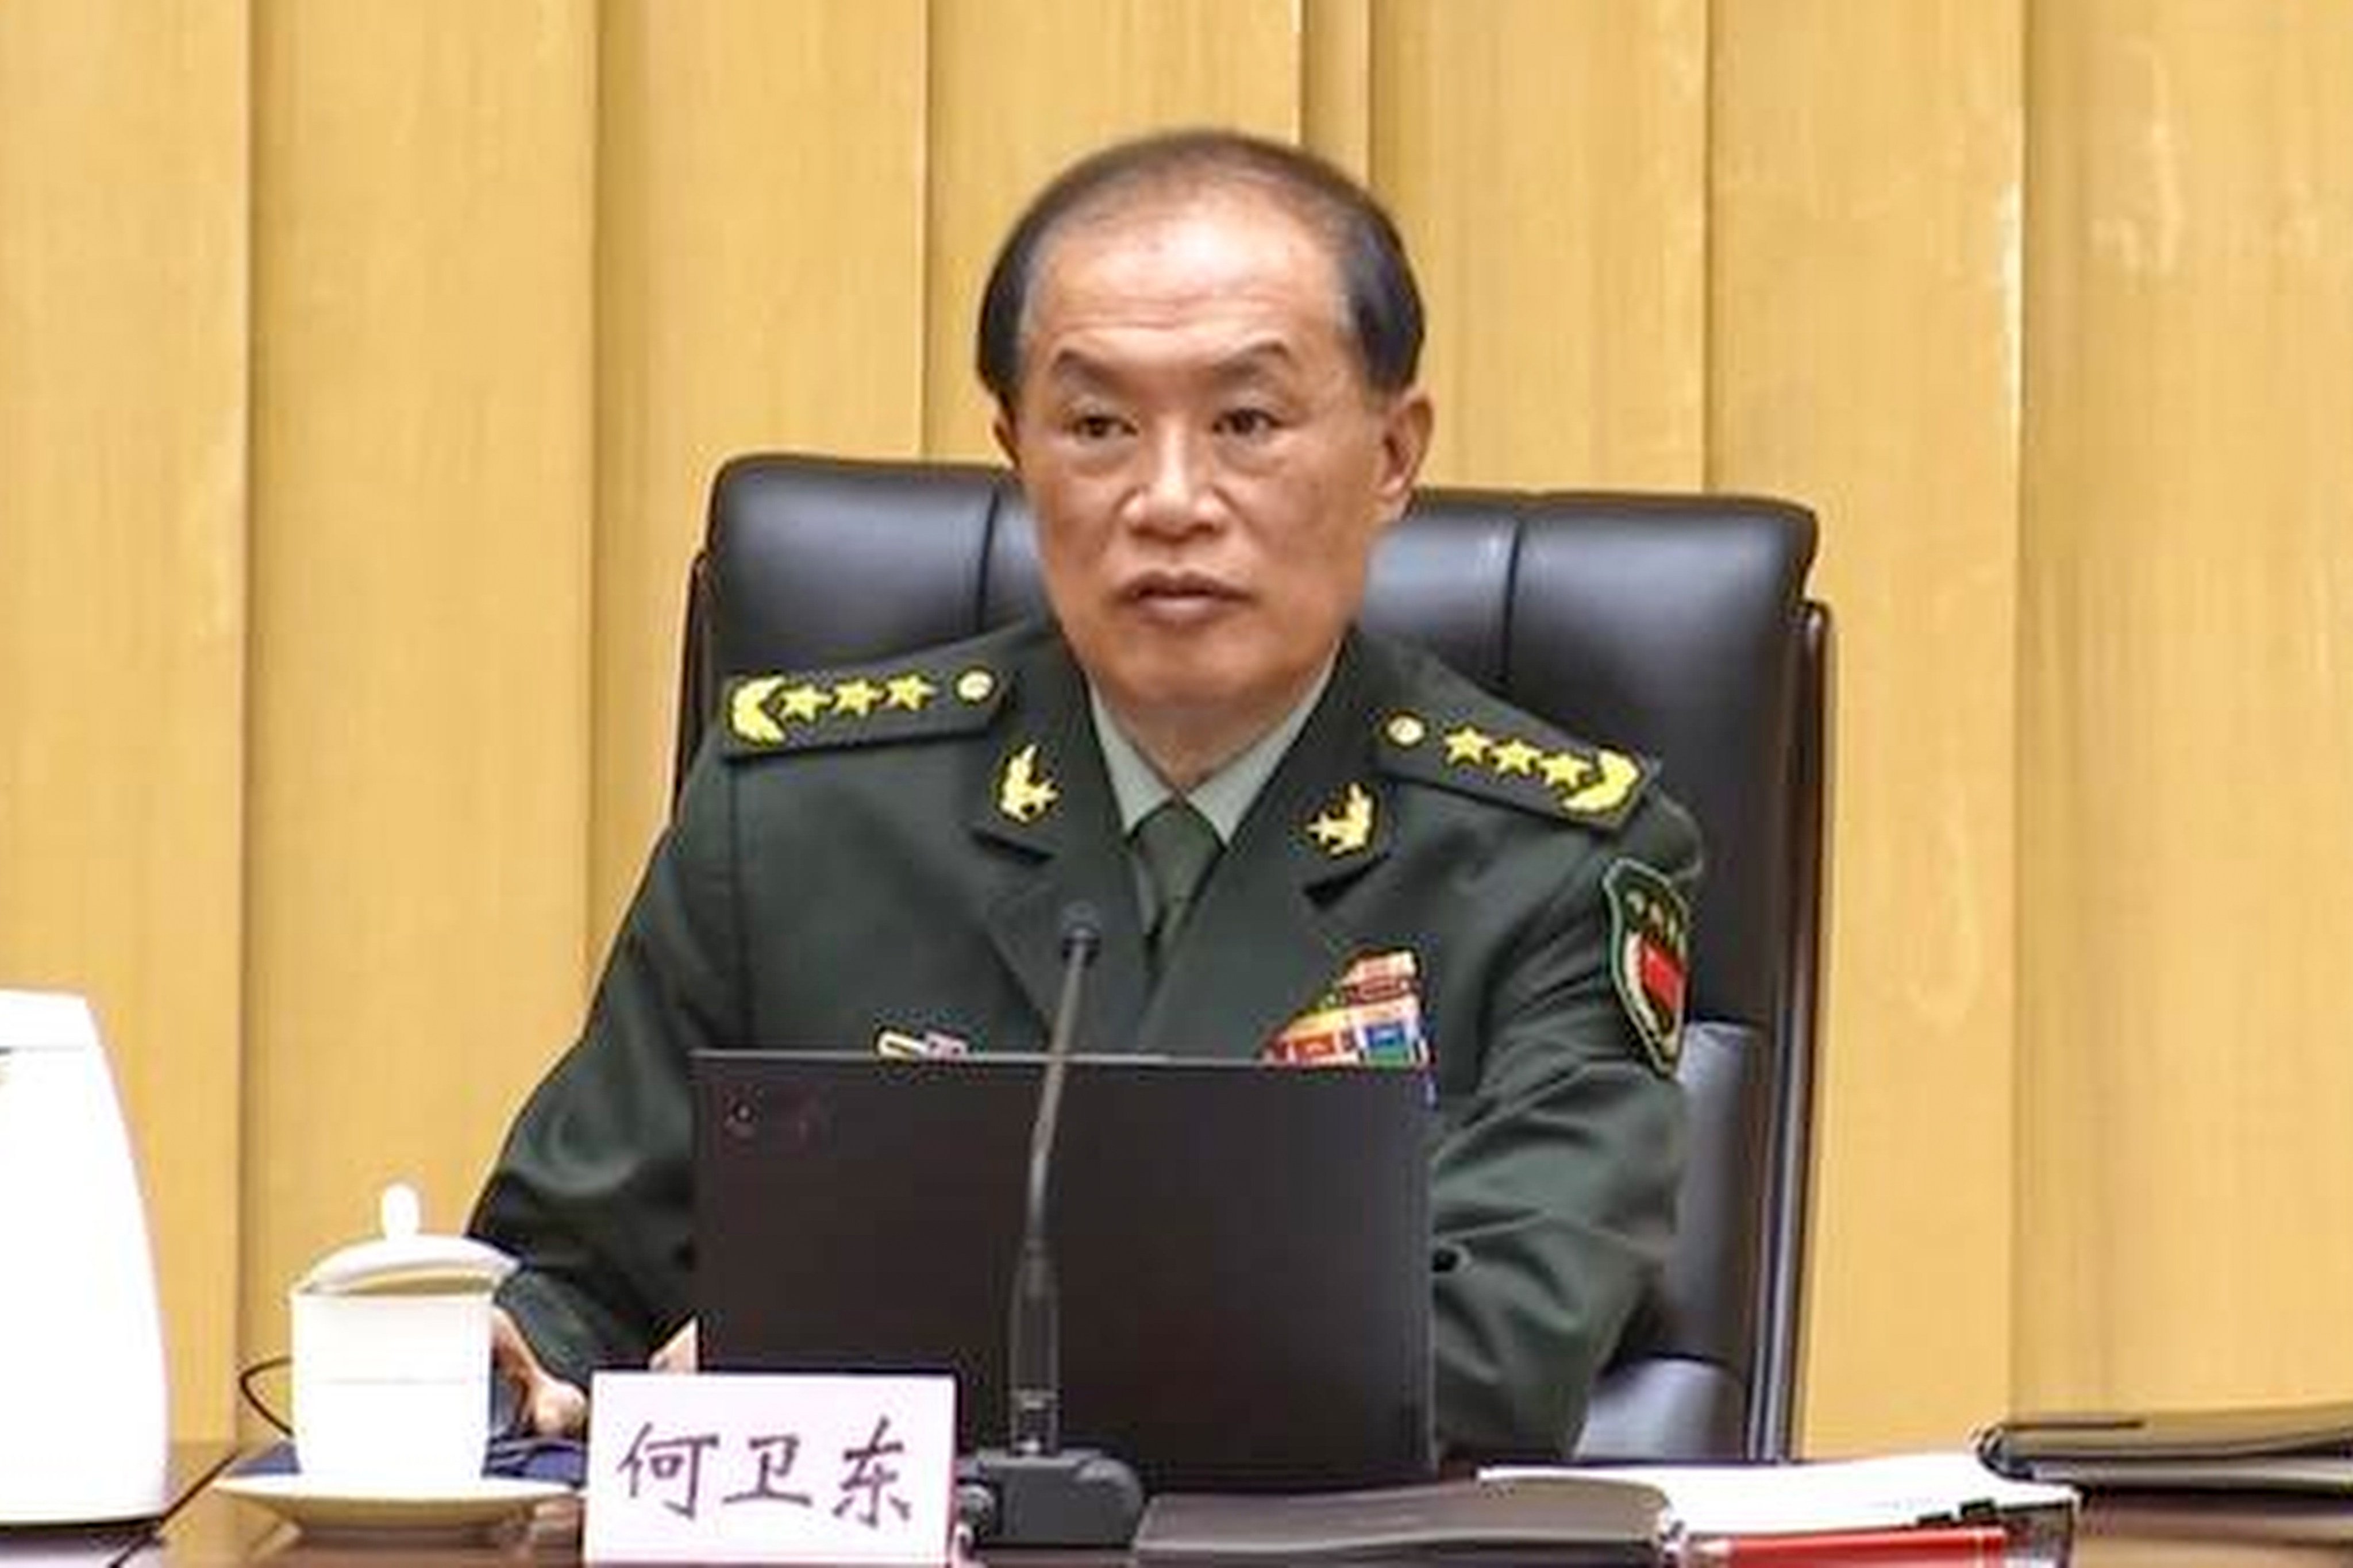 General He Weidong, China’s No 3 military official, took aim at “fake combat capabilities”. Photo: CCTV